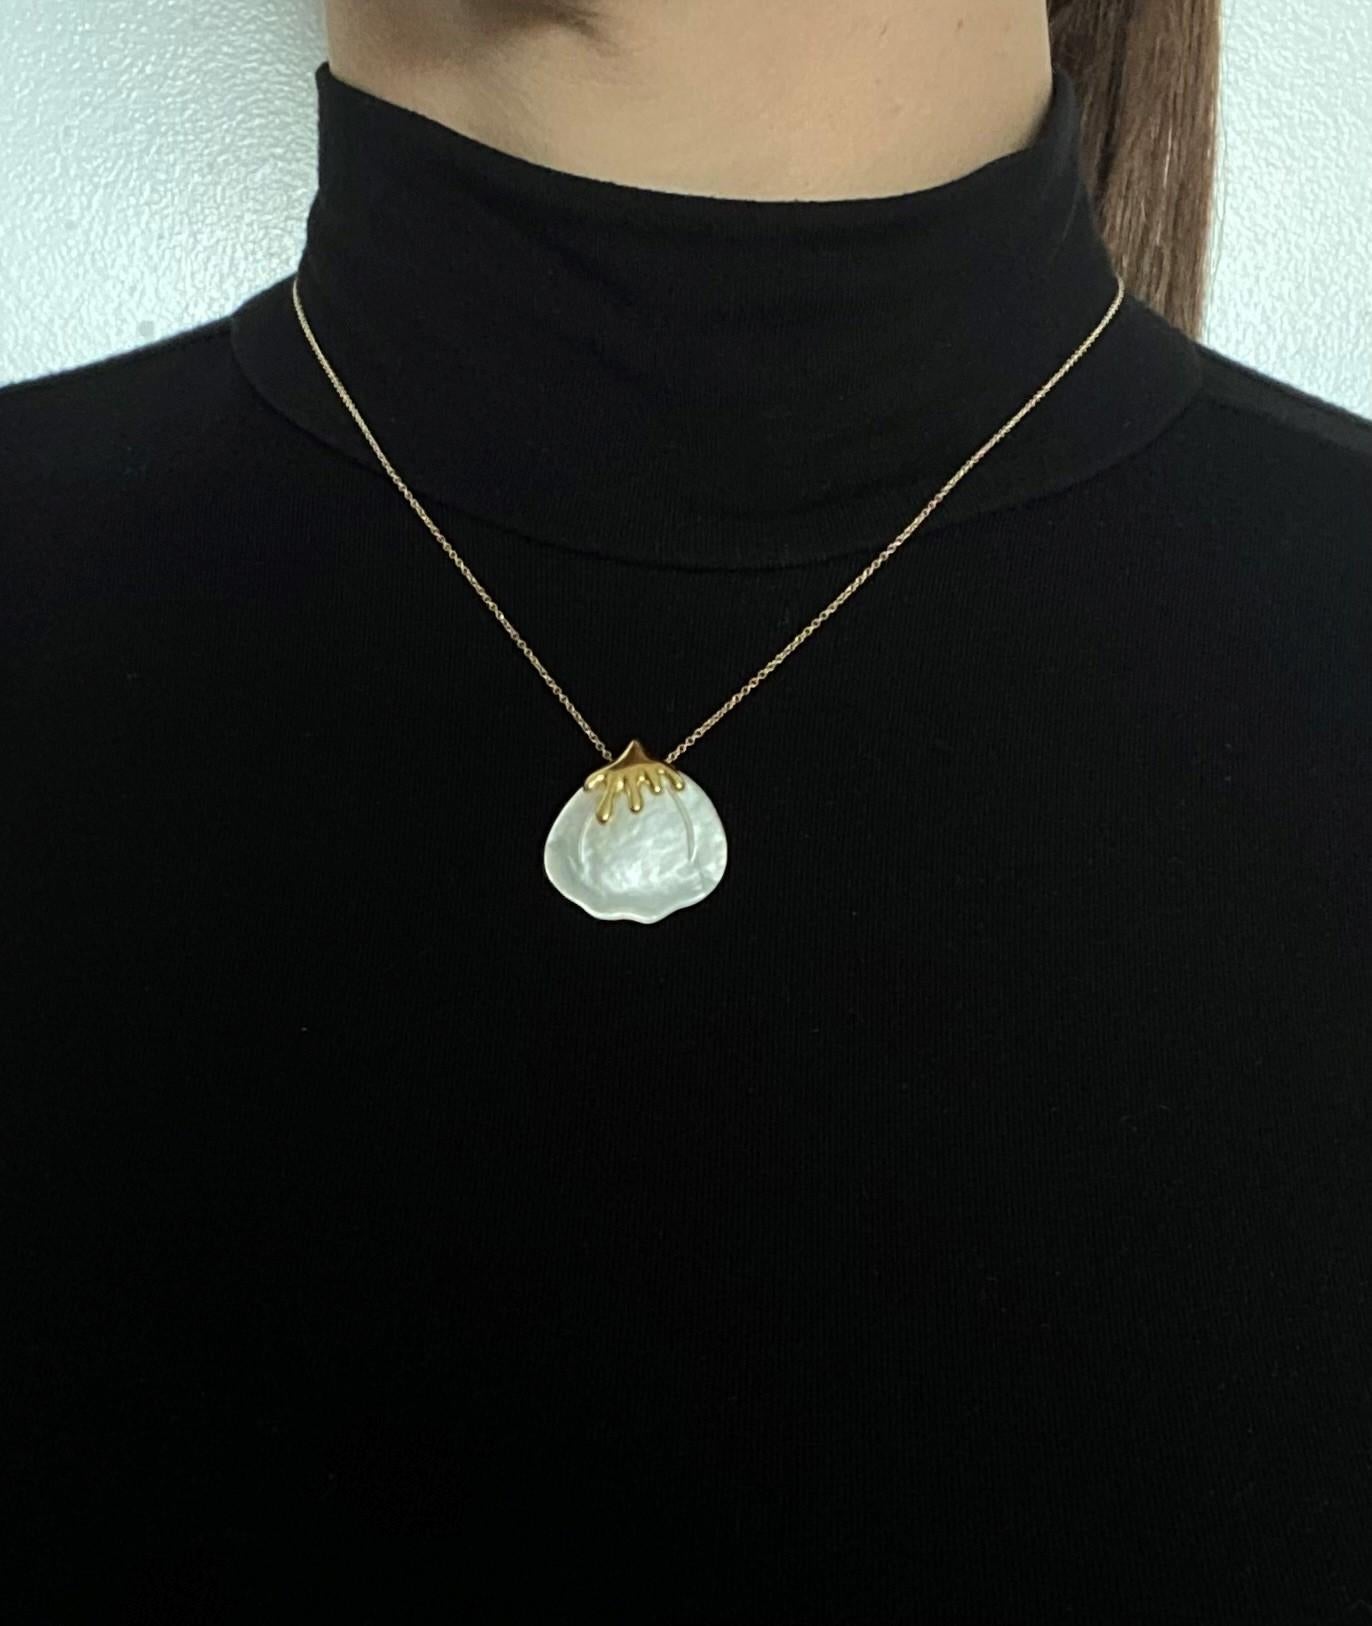 Tiffany & Co 1976 Angela Cummings White Nacre Petal Necklace in 18kt Yellow Gold For Sale 2